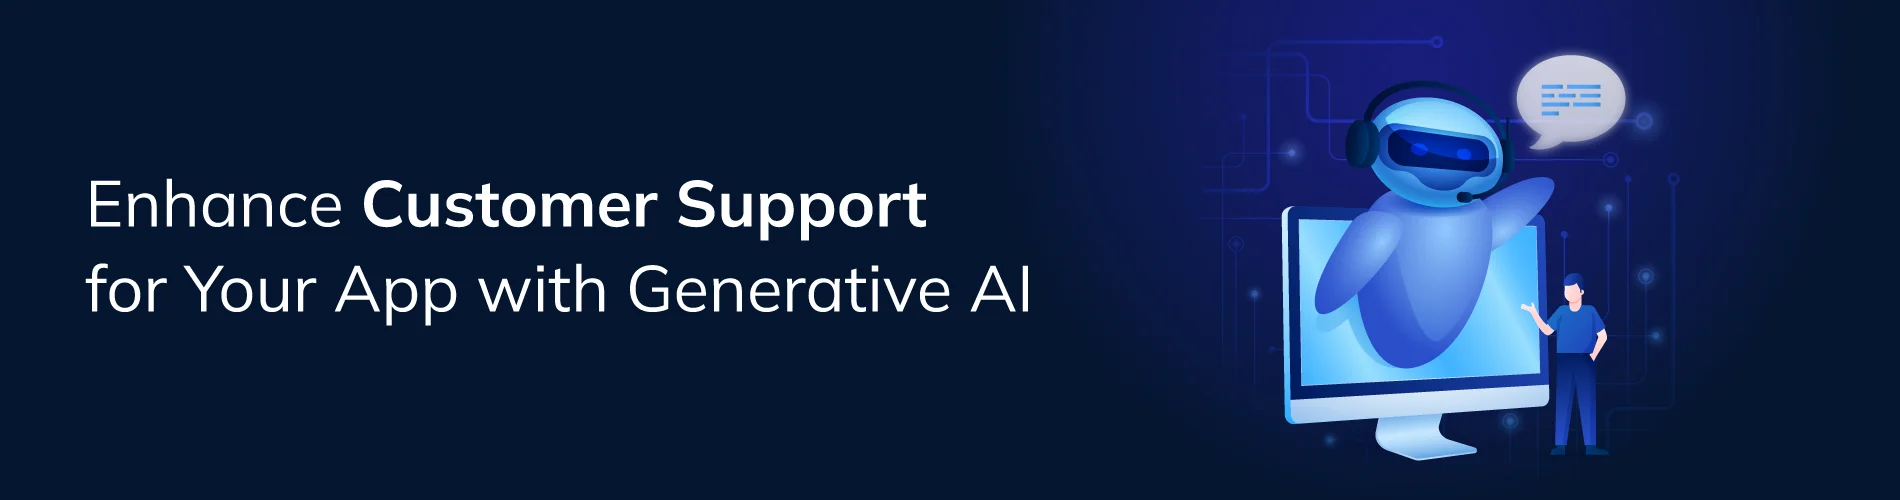 Enhance Customer Support for Your App with Generative AI